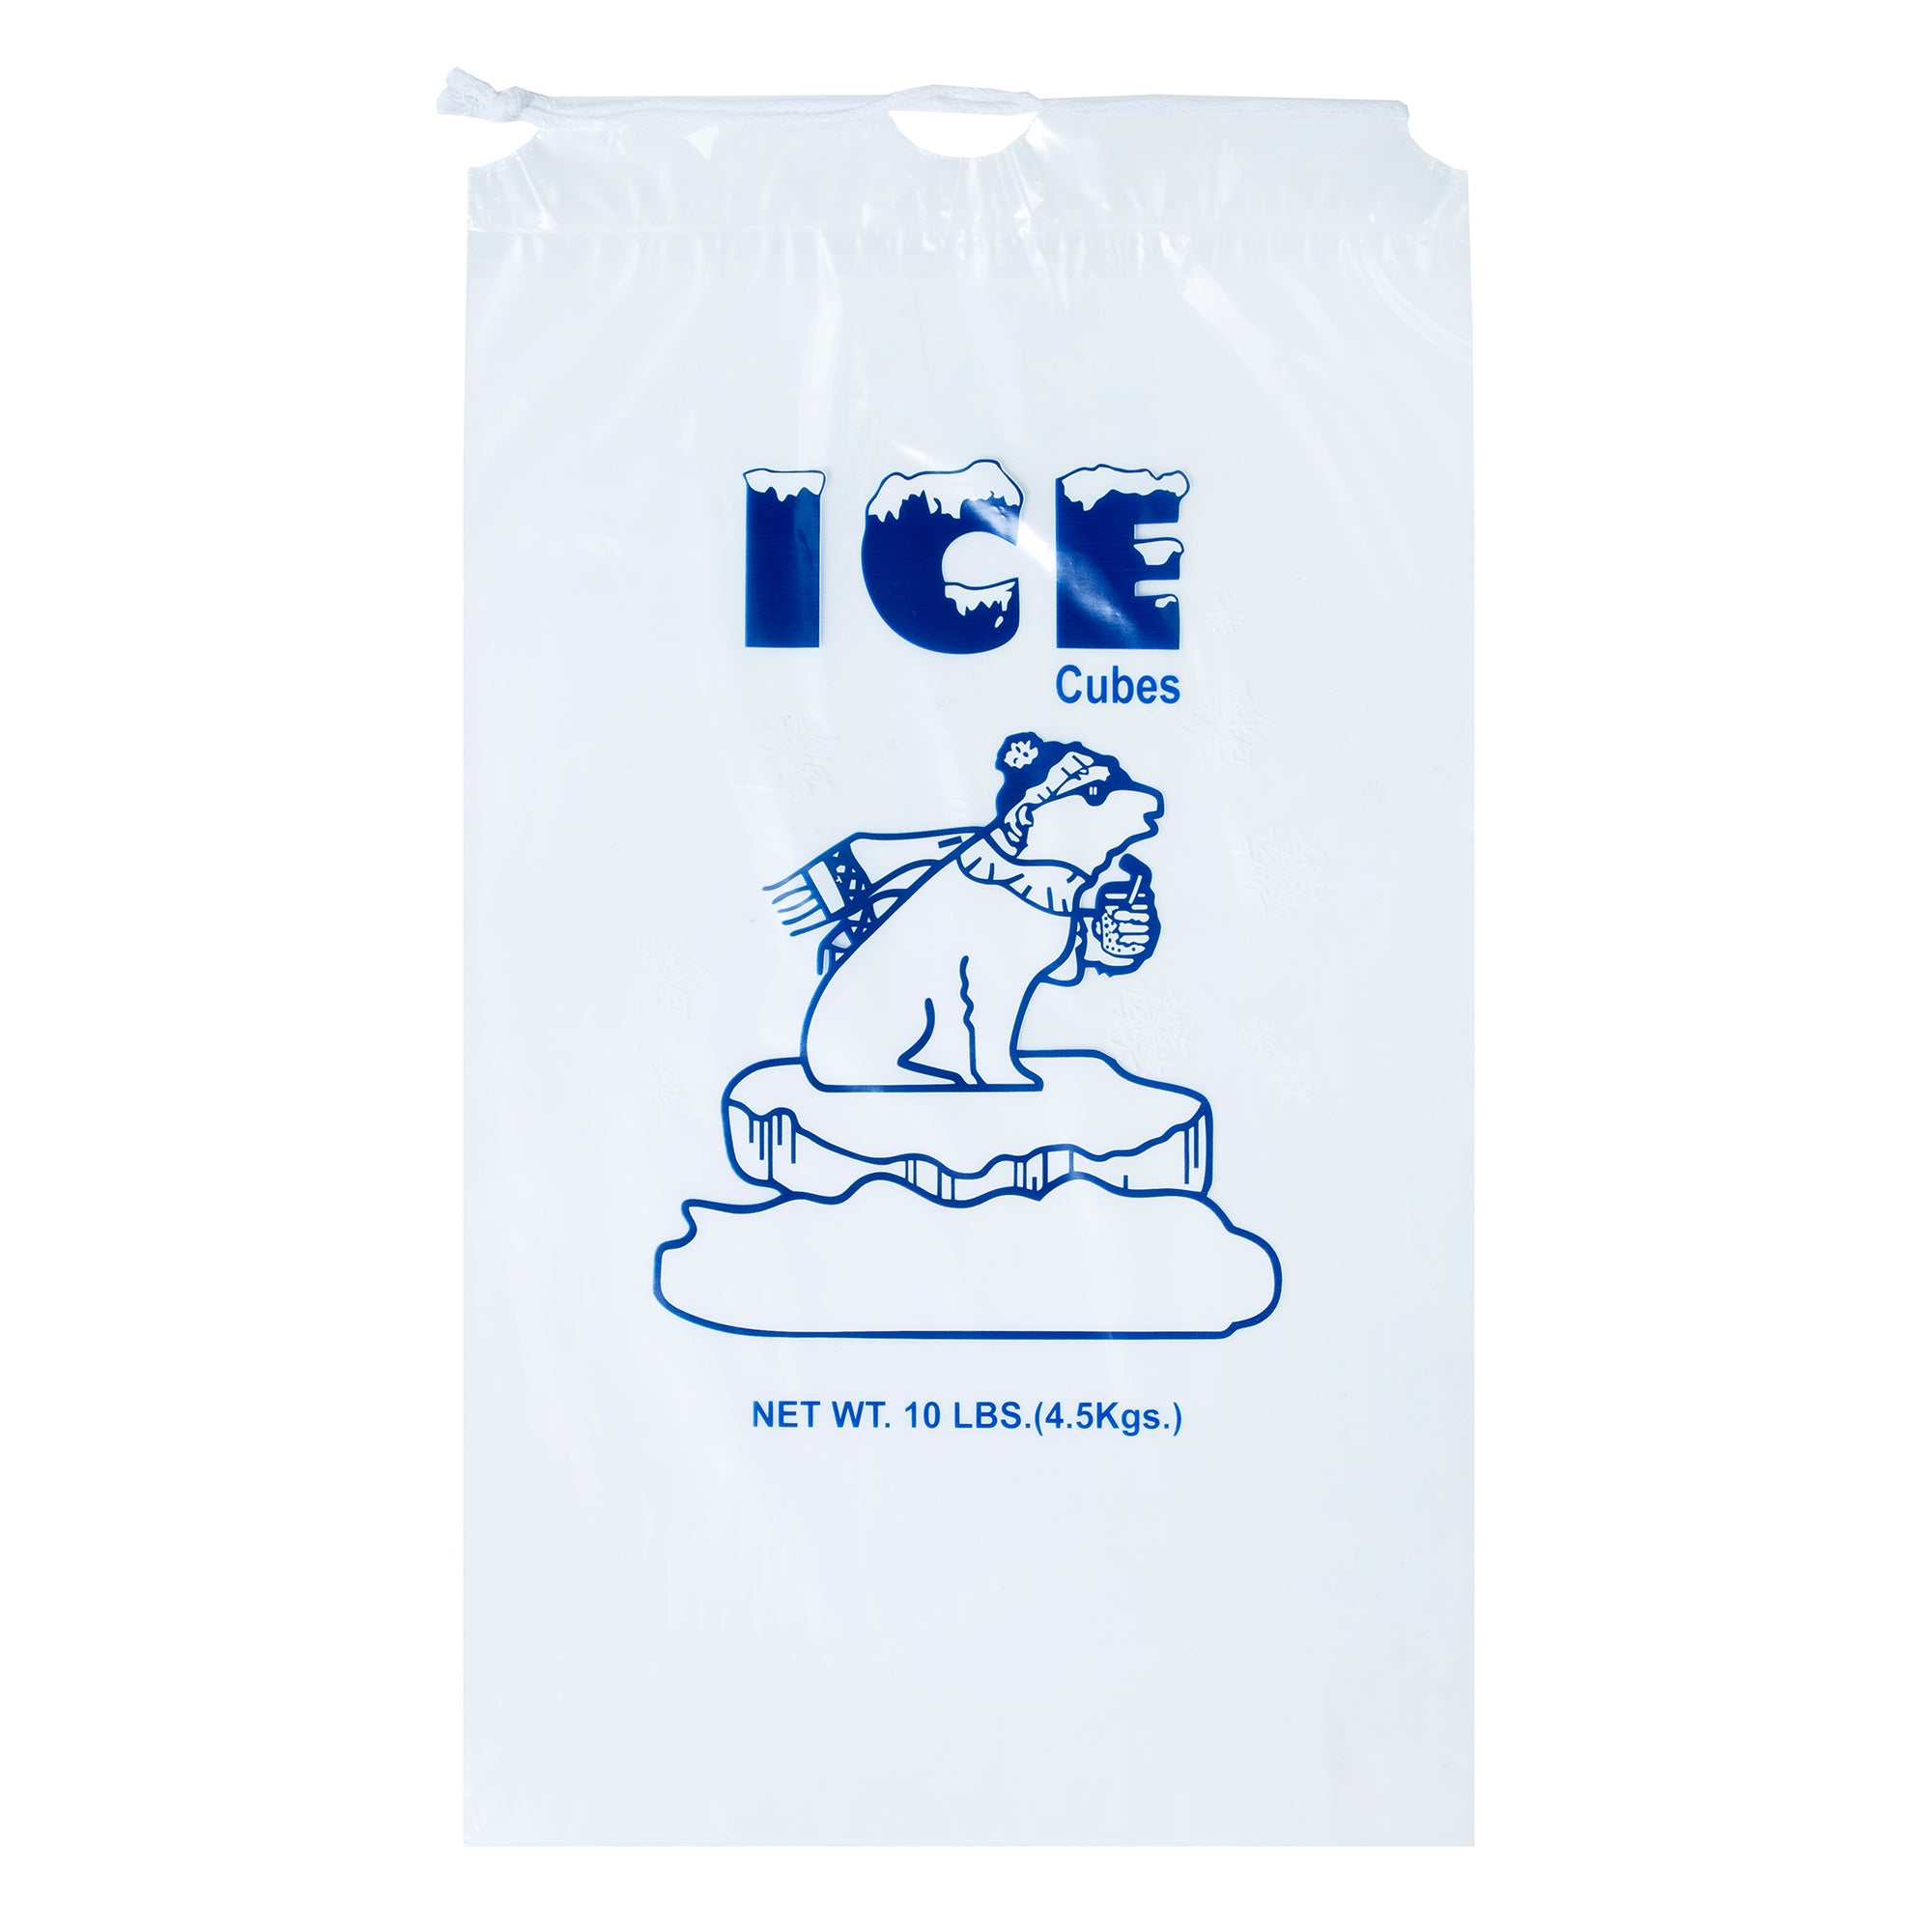 10 lbs ice bag with cotton drawstring